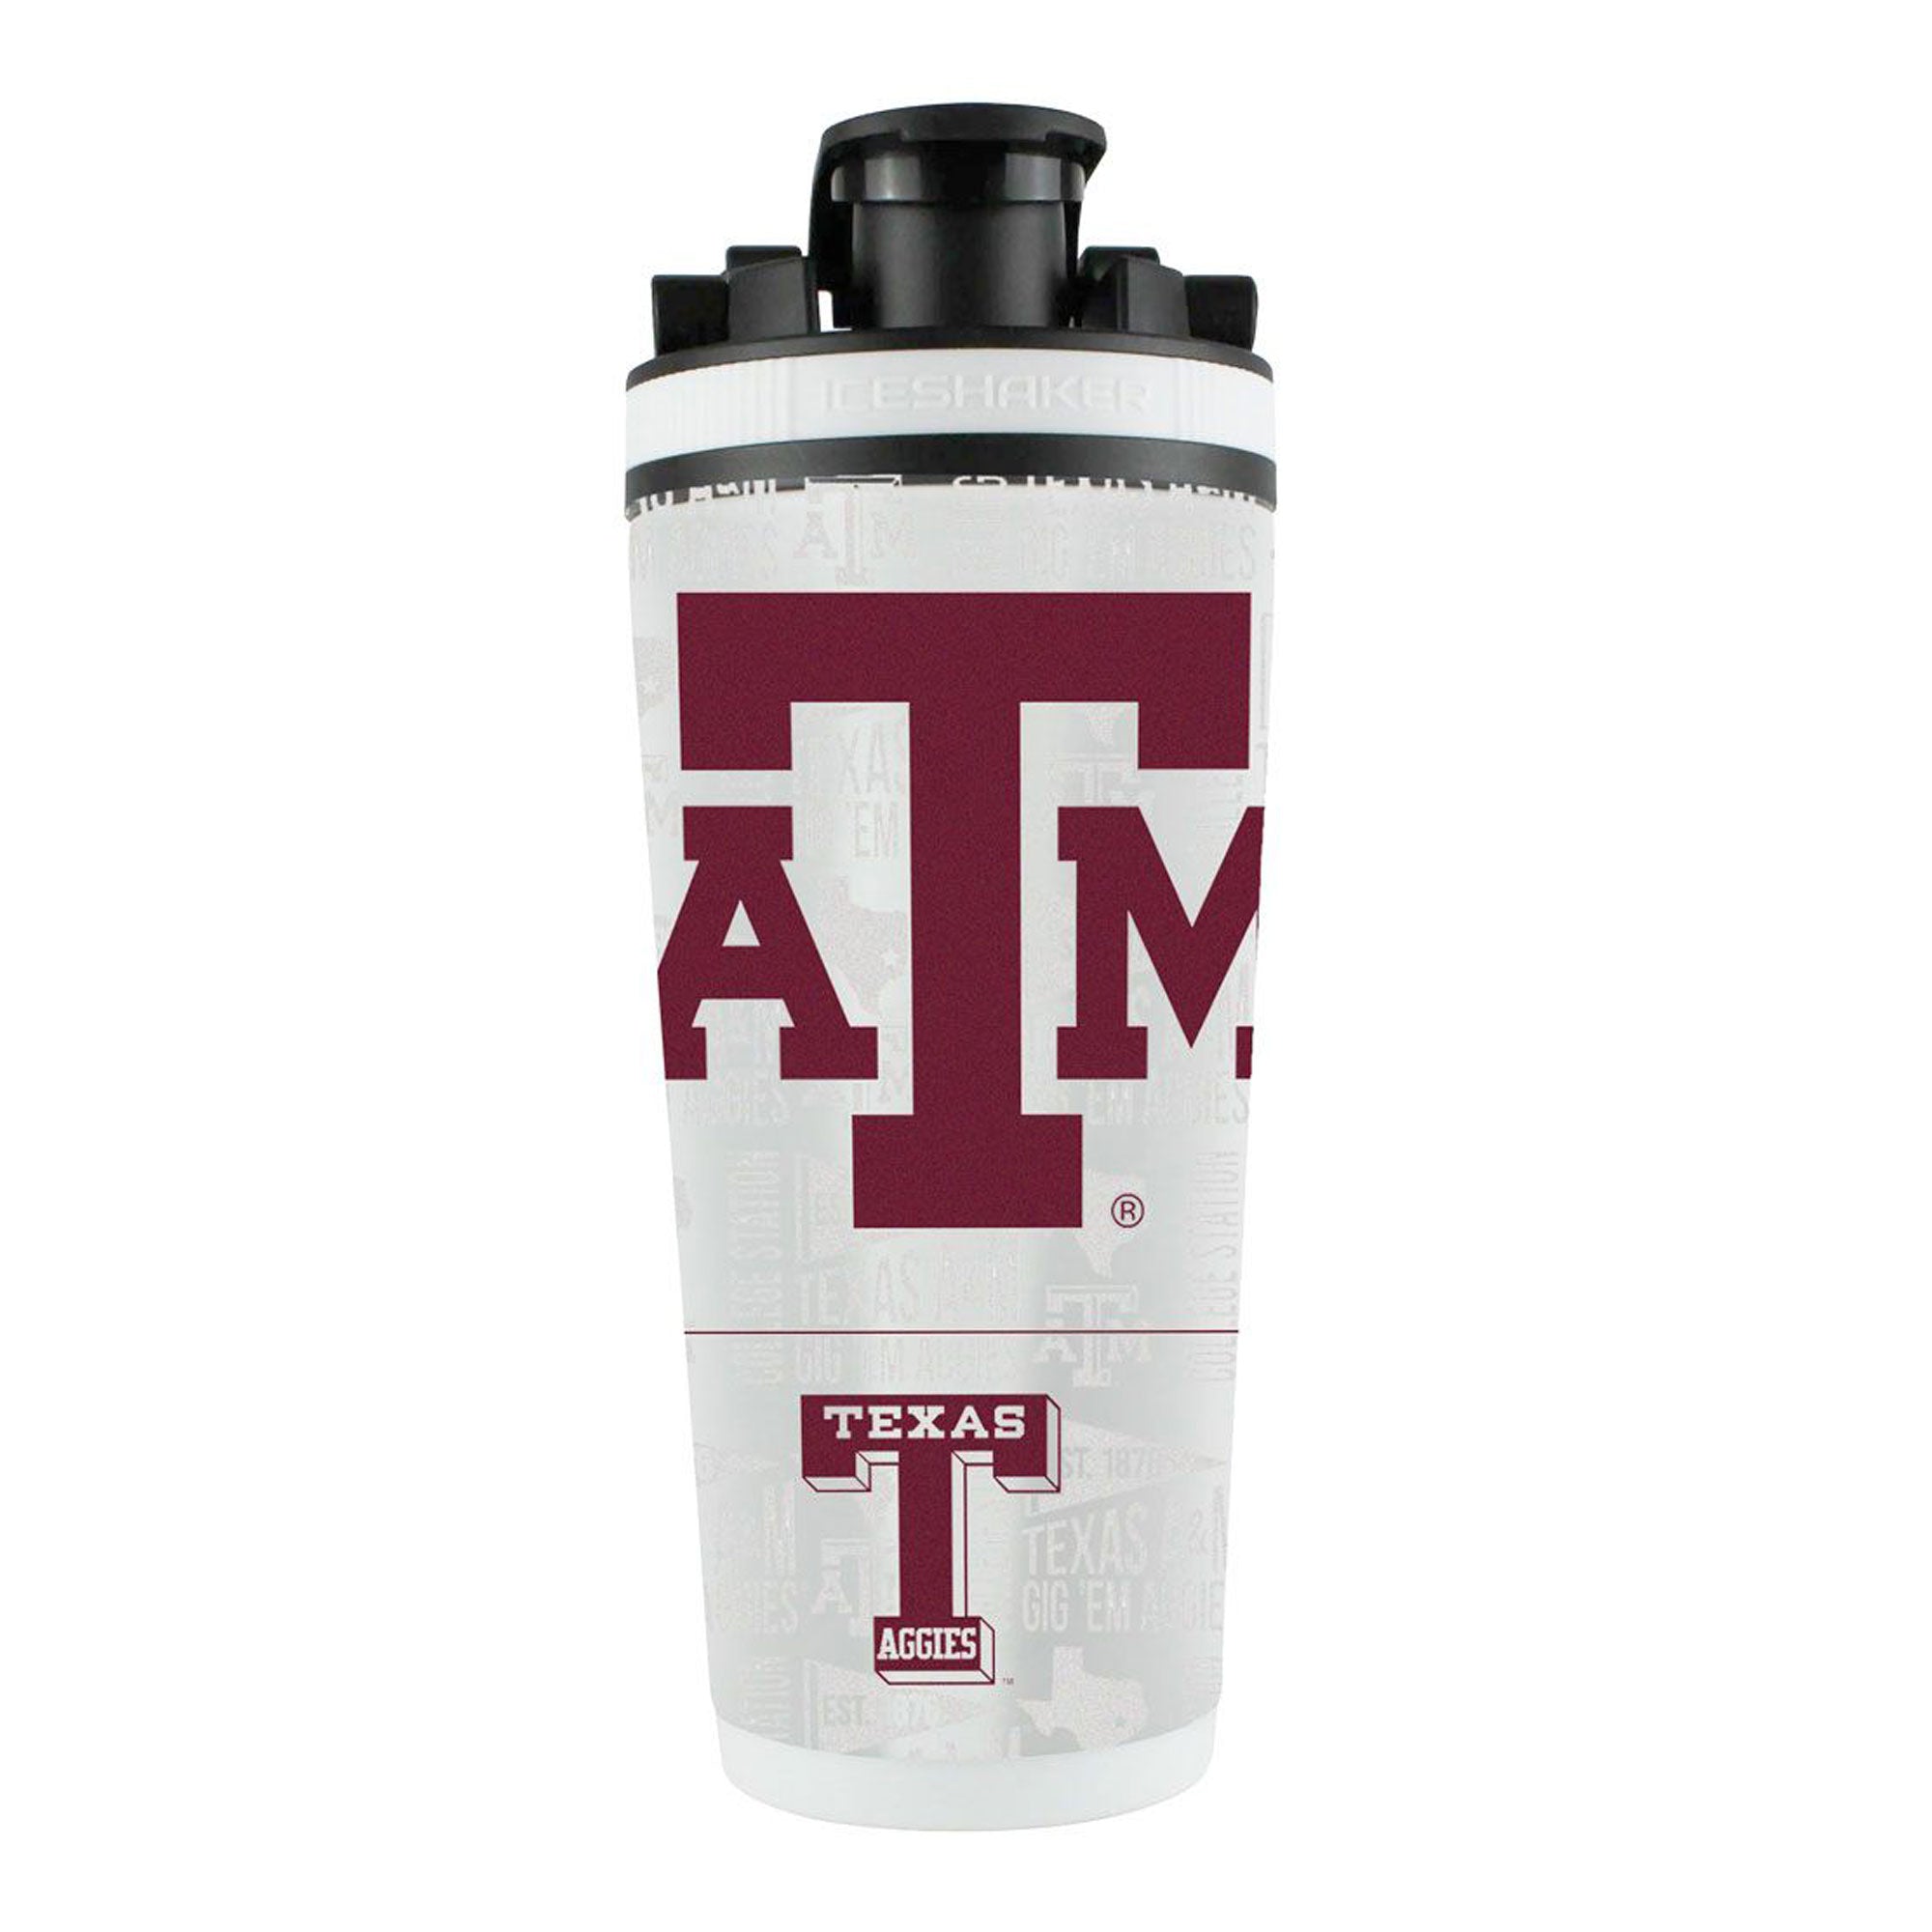 The College Vault - Texas Aggies 4D Ice Shaker